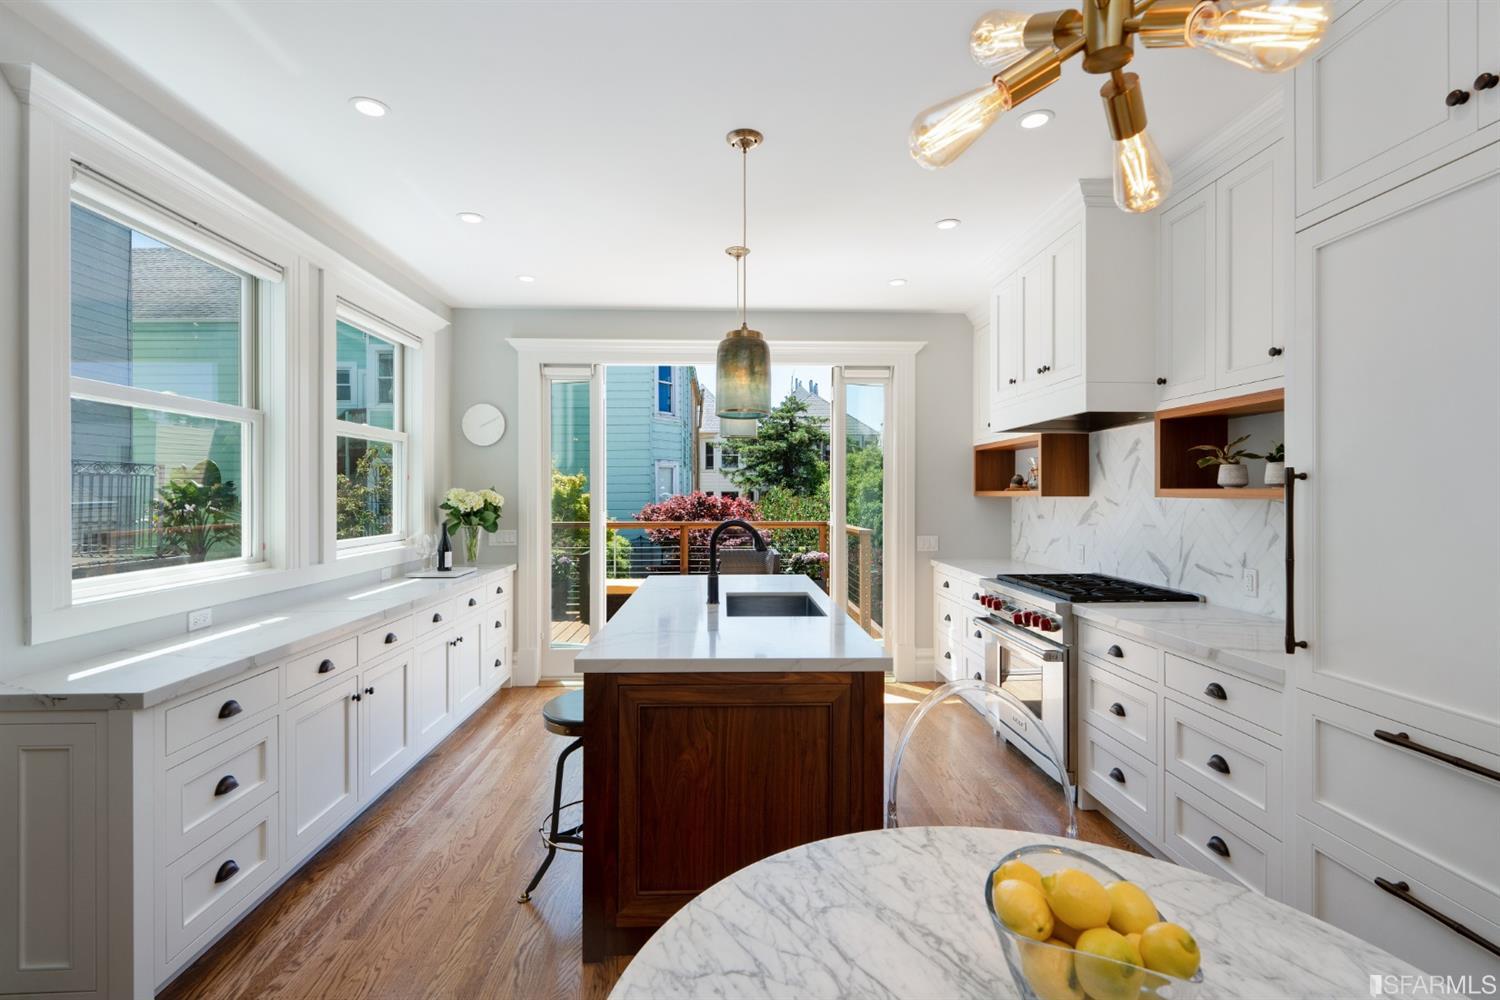 Property Photo: Kitchen, featuring white cabinetry and modern light fixtures